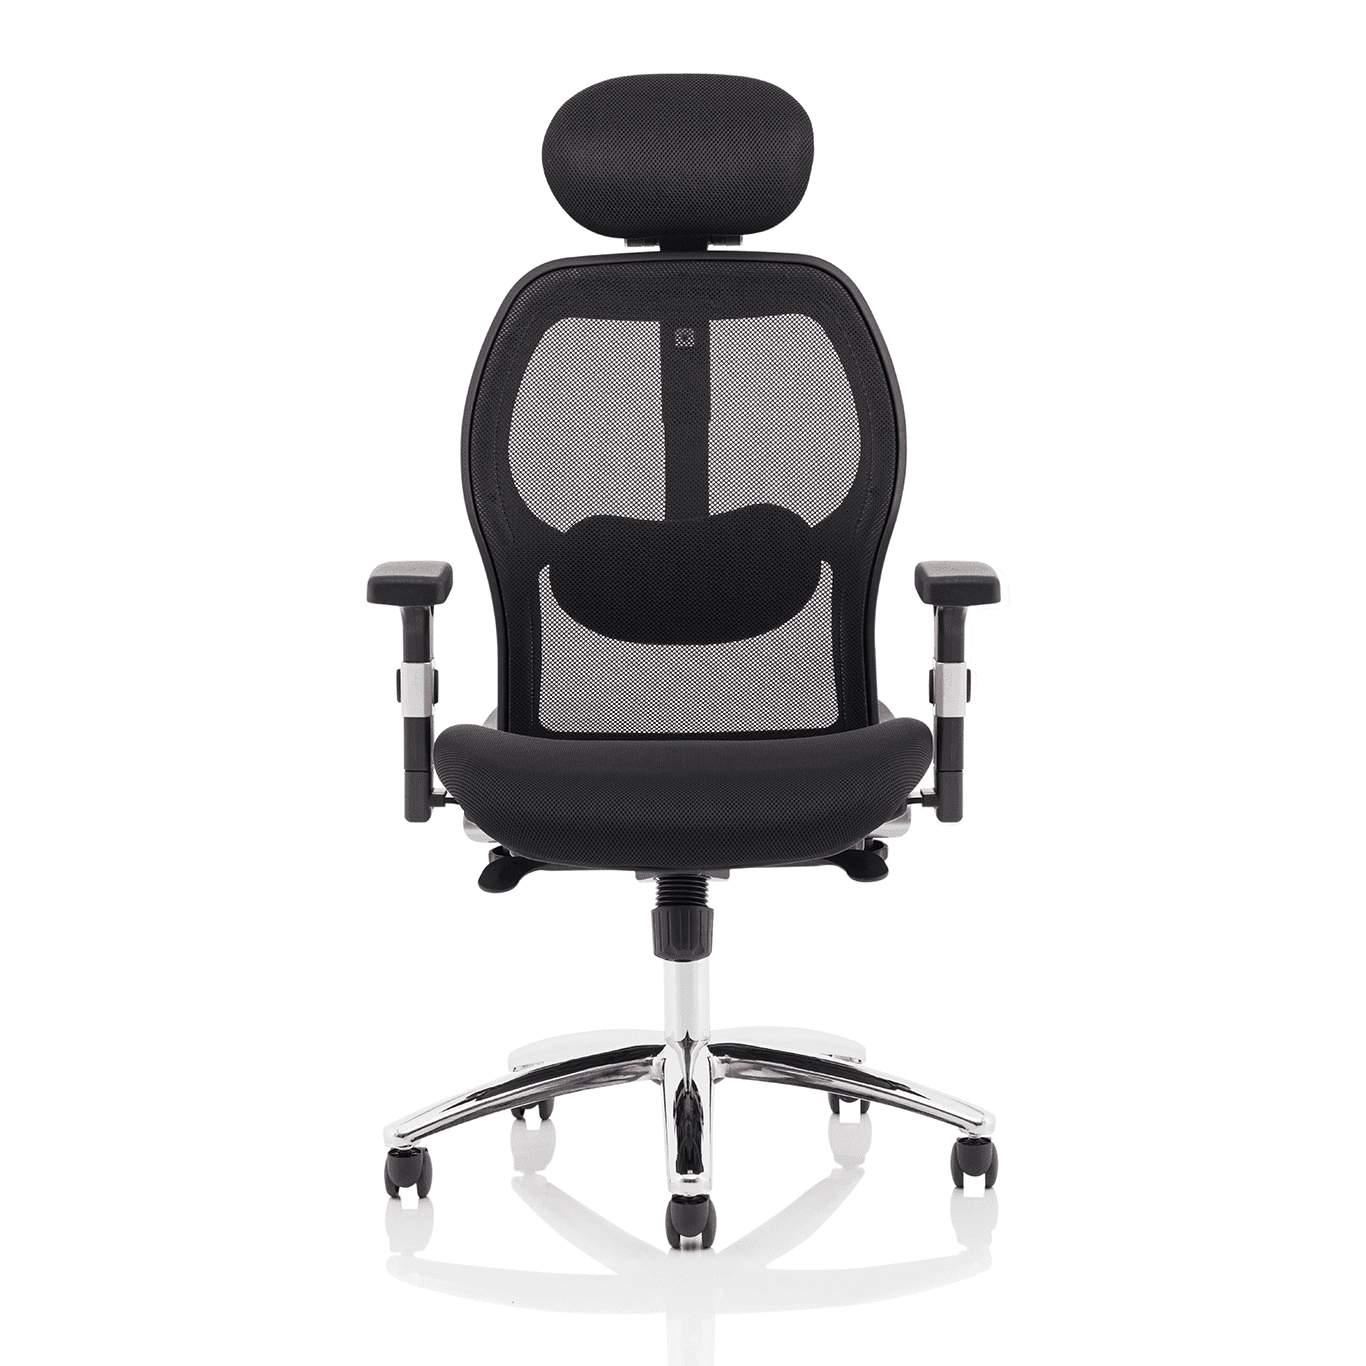 Sanderson II High Mesh Back Executive Office Chair - Airmesh Seat, Chrome Frame, Adjustable Arms & Lumbar Support, 125kg Capacity, 8hr Usage